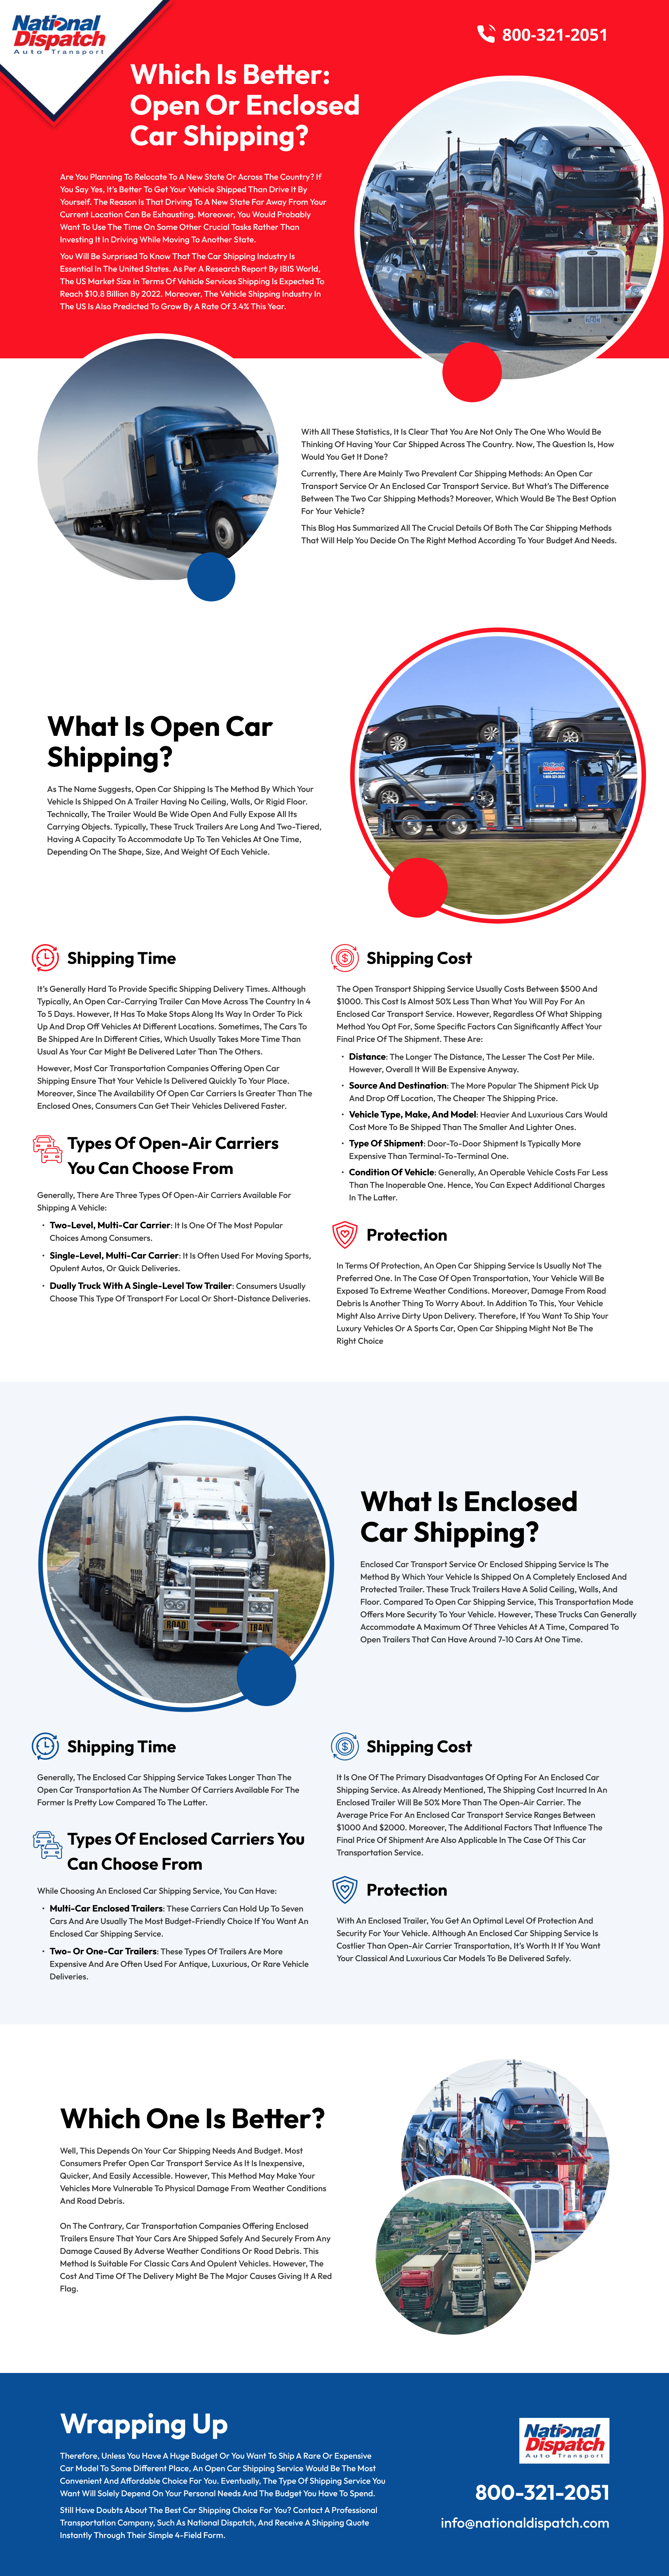 National-Dispatch-Infographic